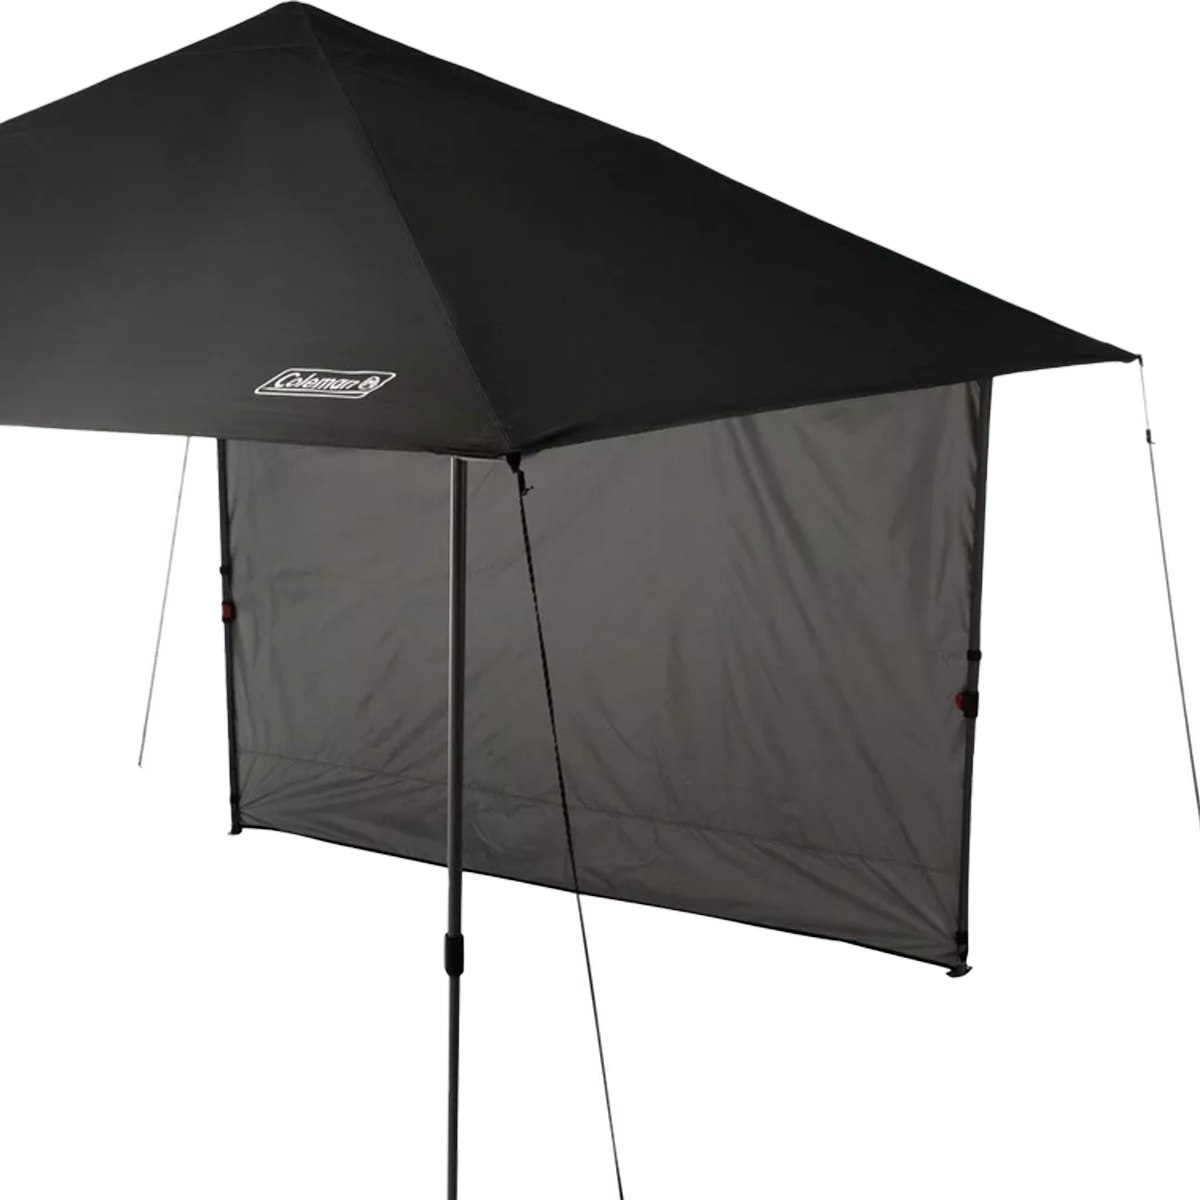 Oasis Lite Canopy 10 x 10 Onepeak with Sun Wall alternate view